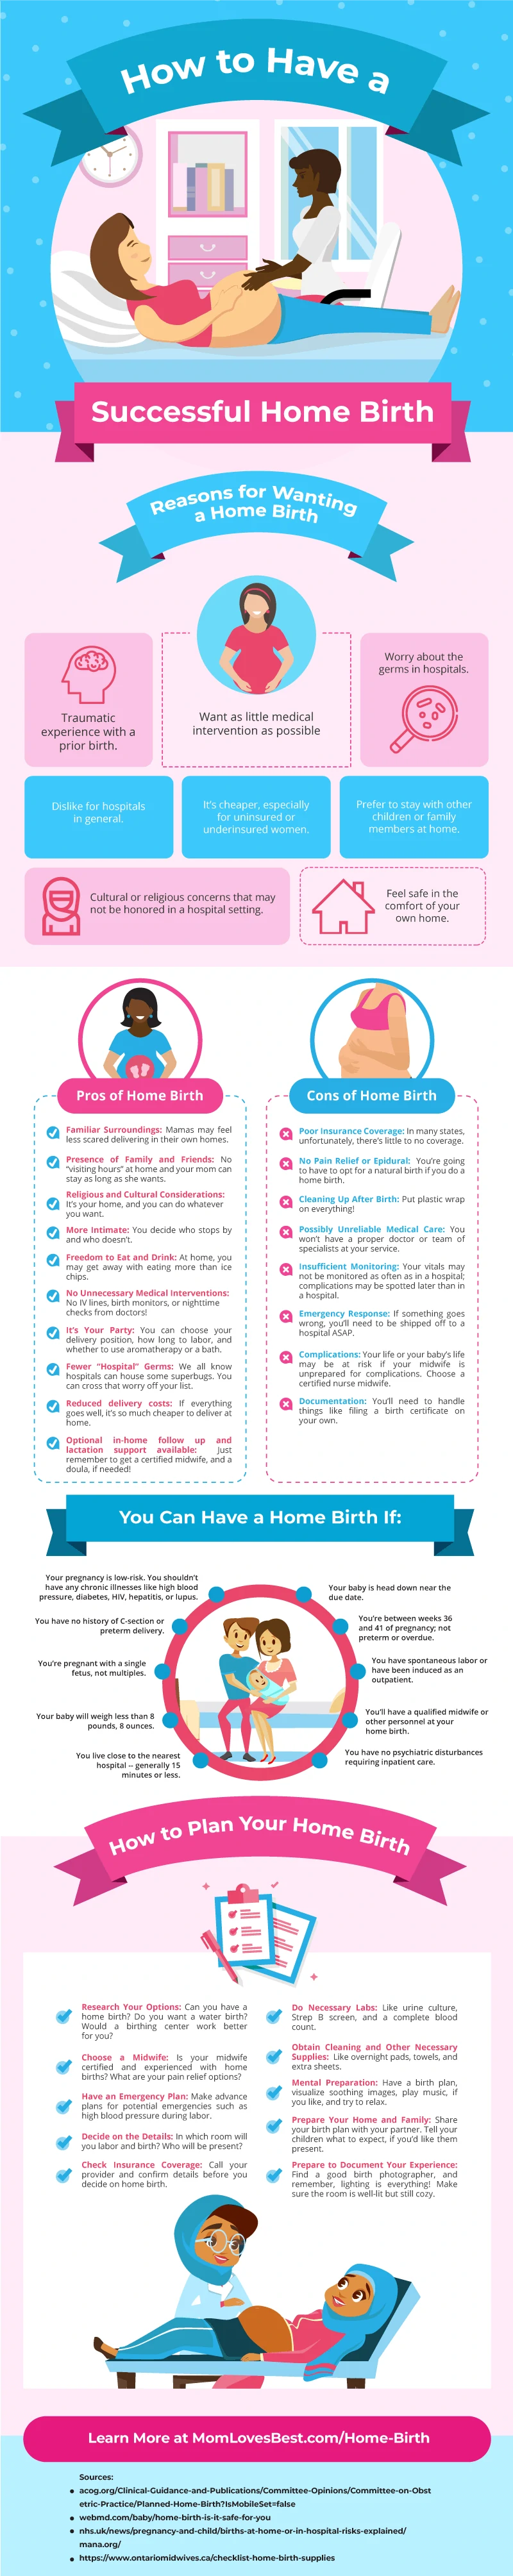 Home Birth Pros and Cons